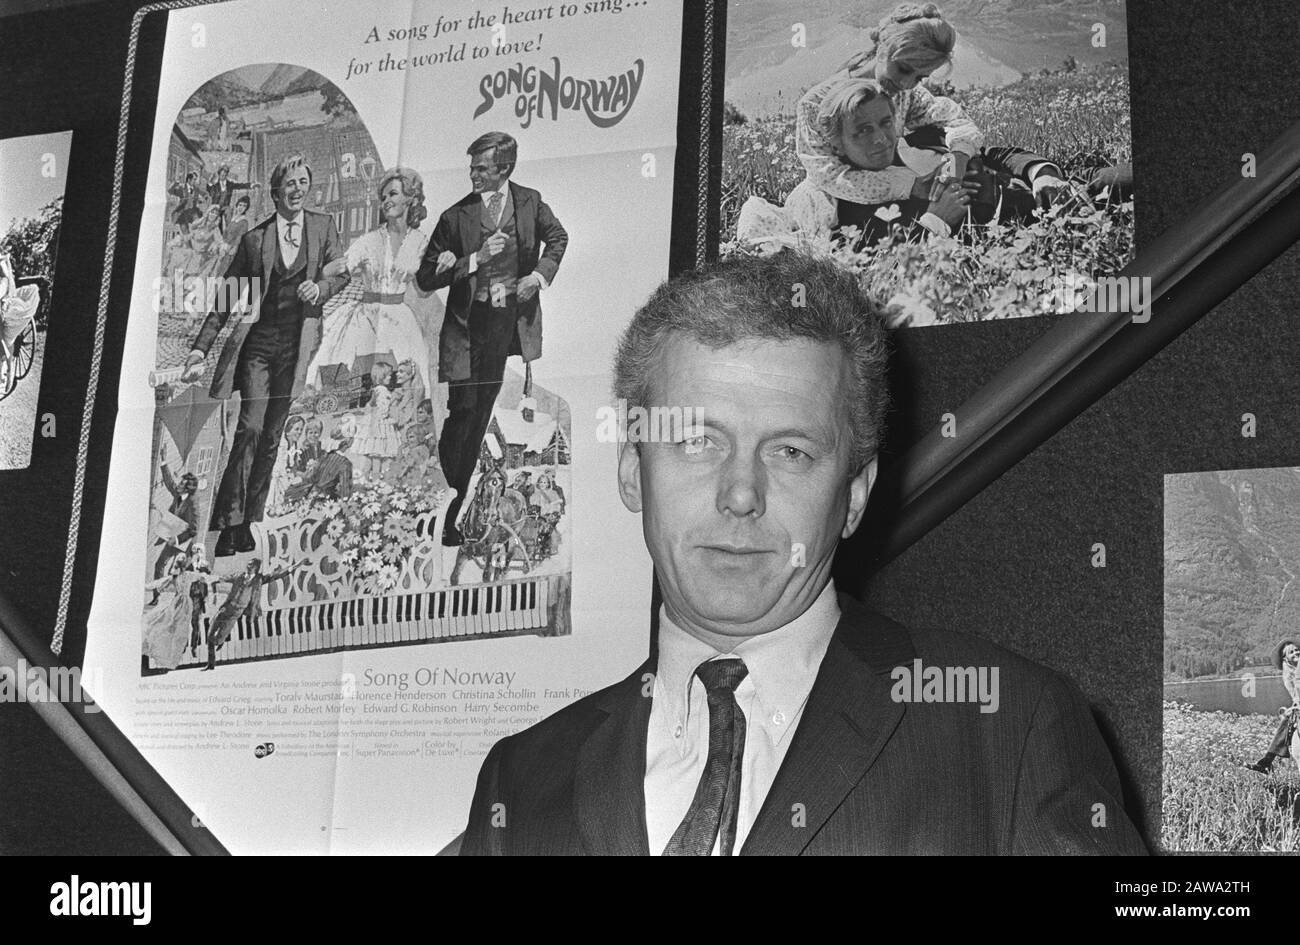 Premiere of the musical film Song of Norway in Cinerama Amsterdam  Norwegian actor Toralv Maurstad, who plays the role of Edvard Grieg, the movie poster Date: March 11, 1971 Location: Amsterdam, North Holland Keywords: actors, art, cinema, movies, movie stars, portraits Person Name: Maurstad, Toralv Stock Photo